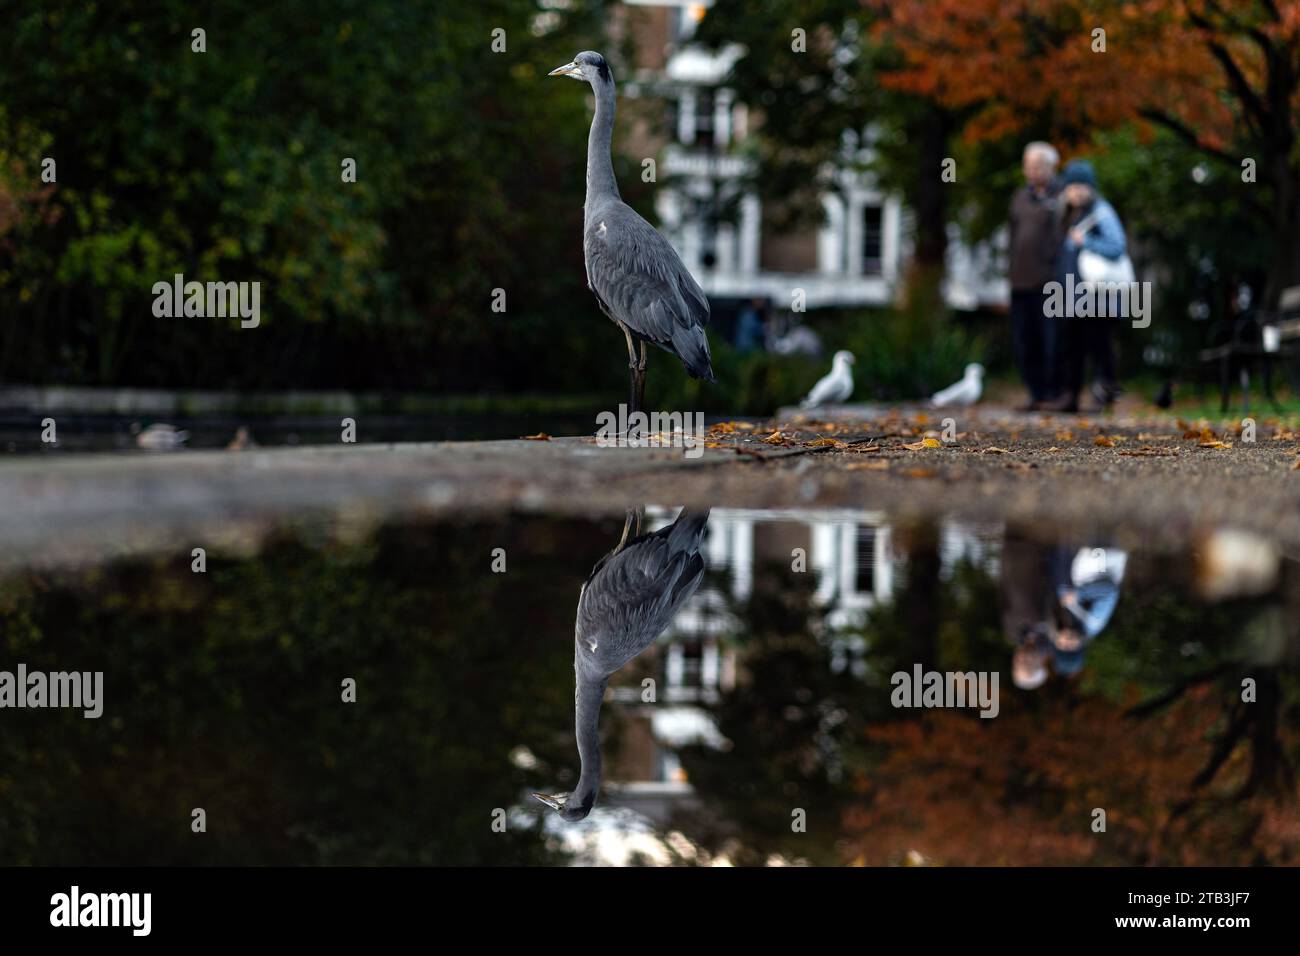 A grey heron in a park and its reflection, London wildlife Stock Photo